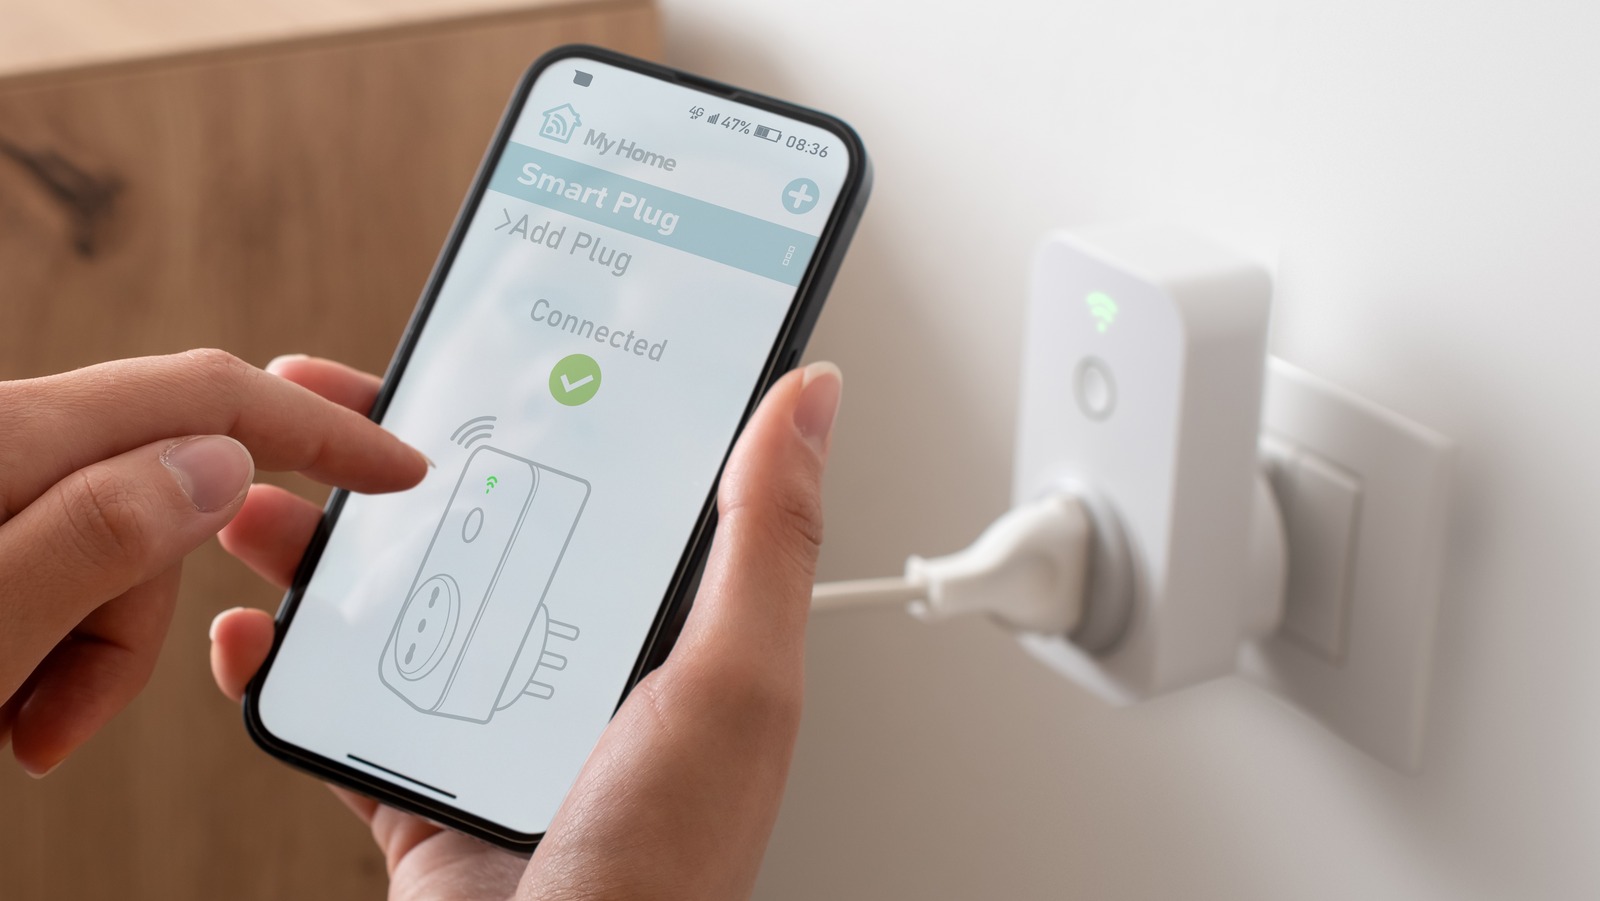 Picking The Right Smart Plugs Matters, Here’s Why – SlashGear